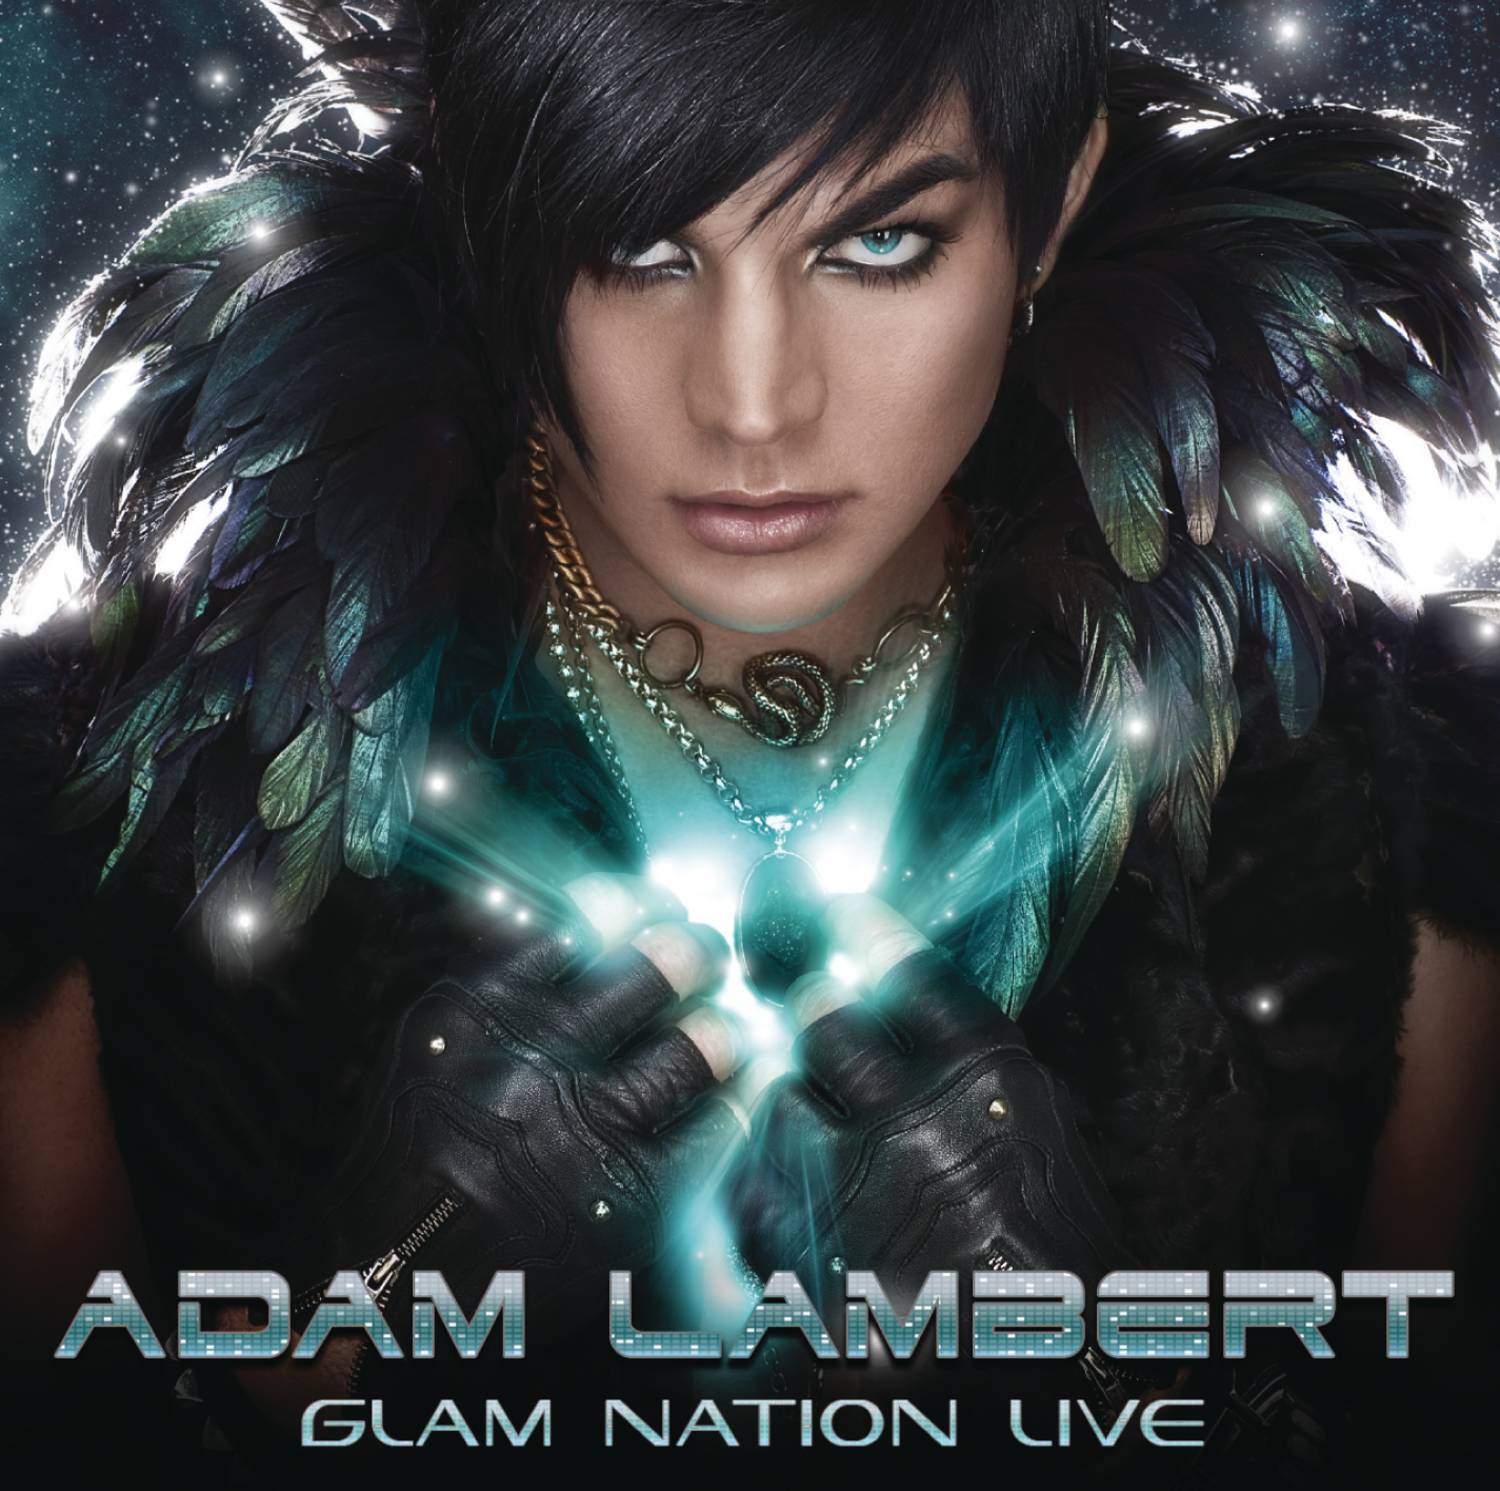 Soaked (Glam Nation Live)